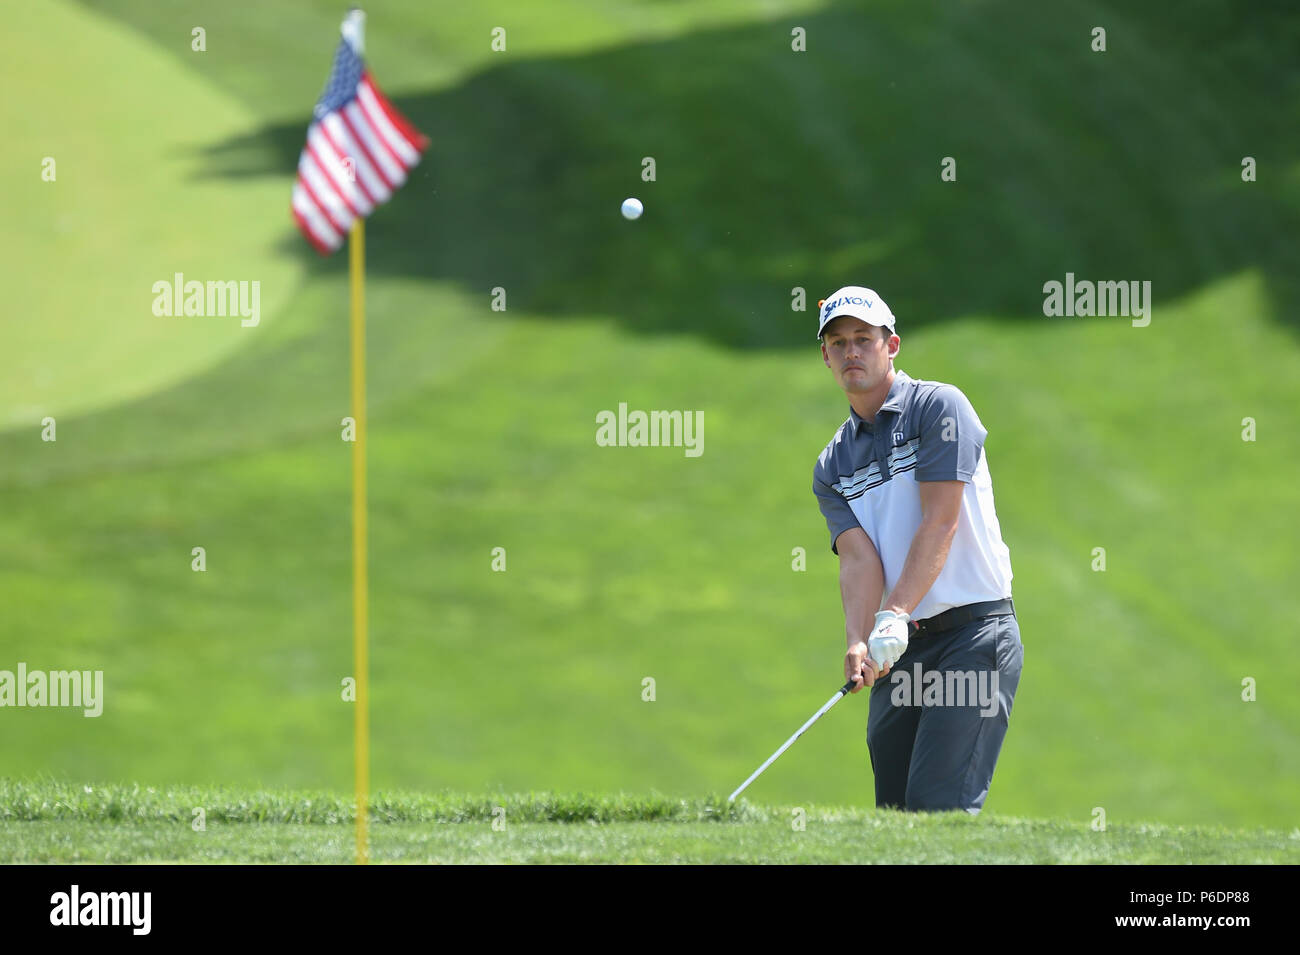 Potomac, Maryland, USA. JUNE 29, 2018 - Andrew Putnam (USA) chips onto the sixteenth green during the second round at the 2018 Quicken Loans National at the Tournament Players Club in Potomac MD. Credit: Cal Sport Media/Alamy Live News Stock Photo